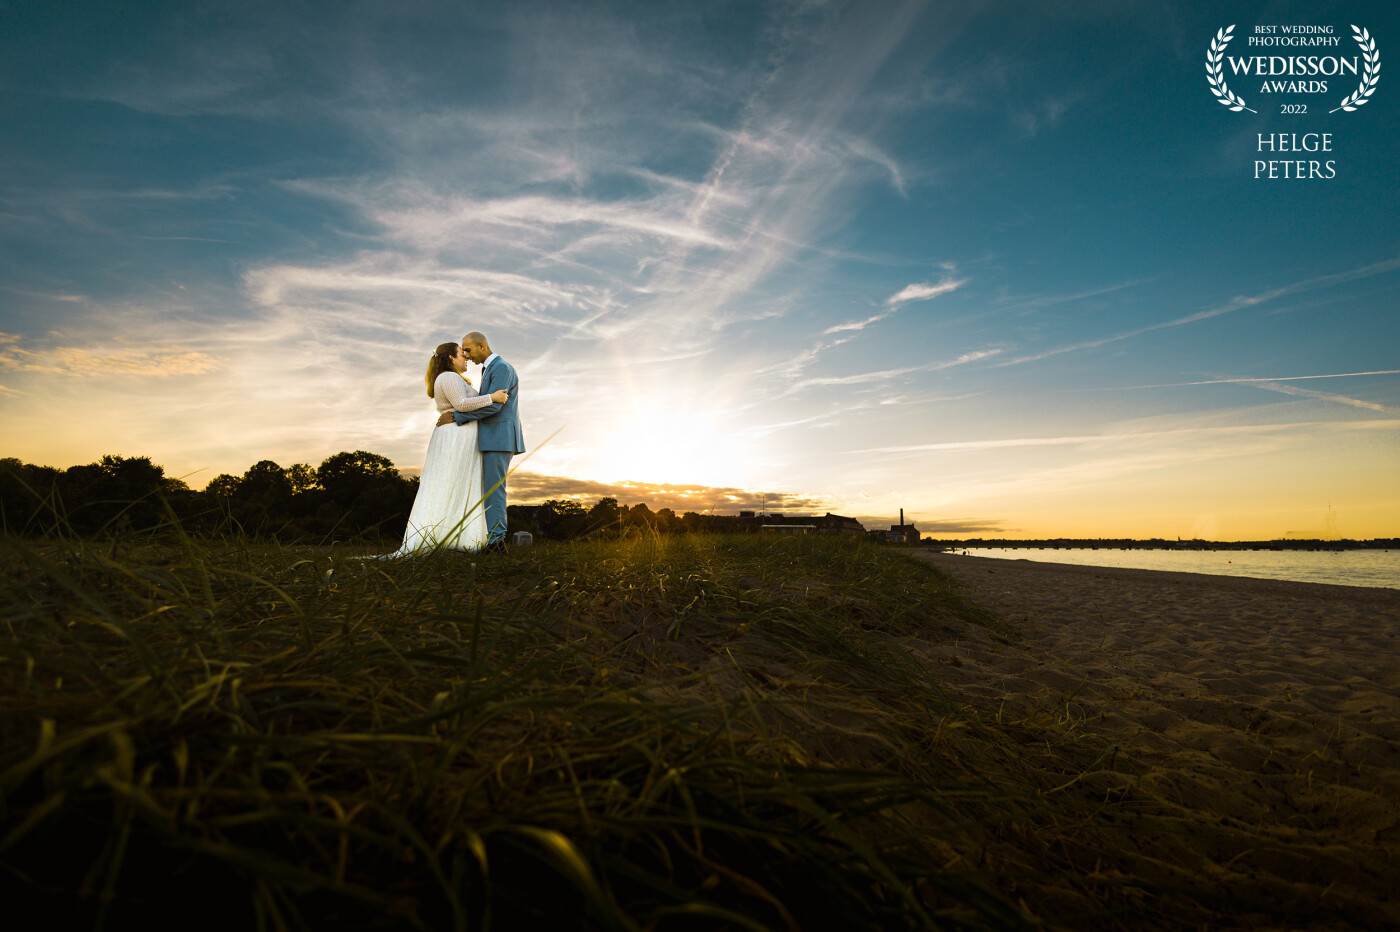 I love to do the couple shoots of a wedding in the golden hour. Living on the beach in northern Gernany, we have several perfekt locations near Eckernförde. Often I'll use an of camera flash to expose the couple in an underexposed enviromental picture directed against the sun. Thank you from the bottom of my heart for this award!